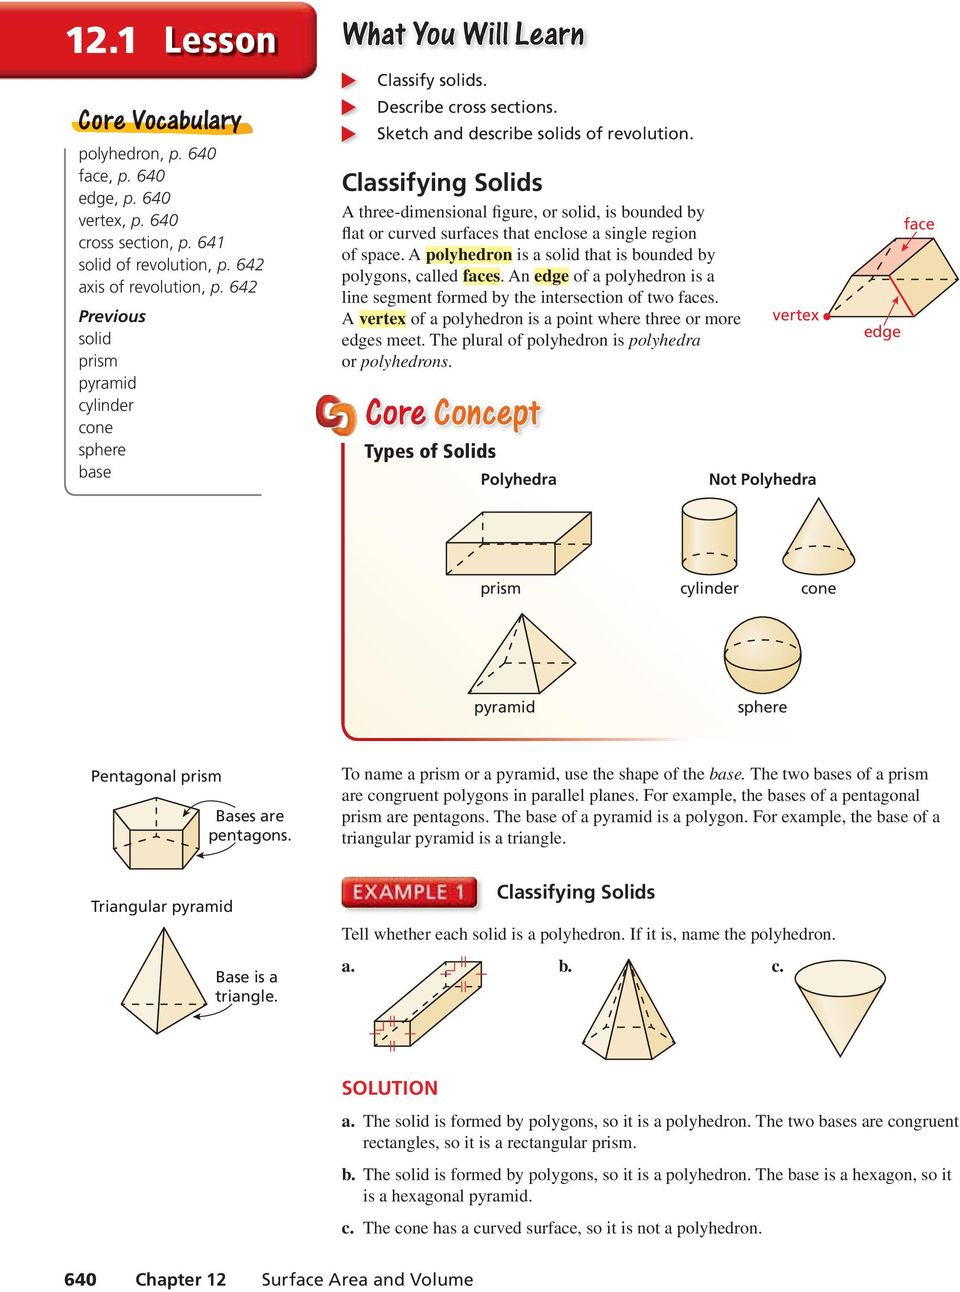 Classifying Solids A three-dimensional figure, or solid, is bounded by flat or curved surfaces that enclose a single region of space. A polyhedron is a solid that is bounded by polygons, called faces.